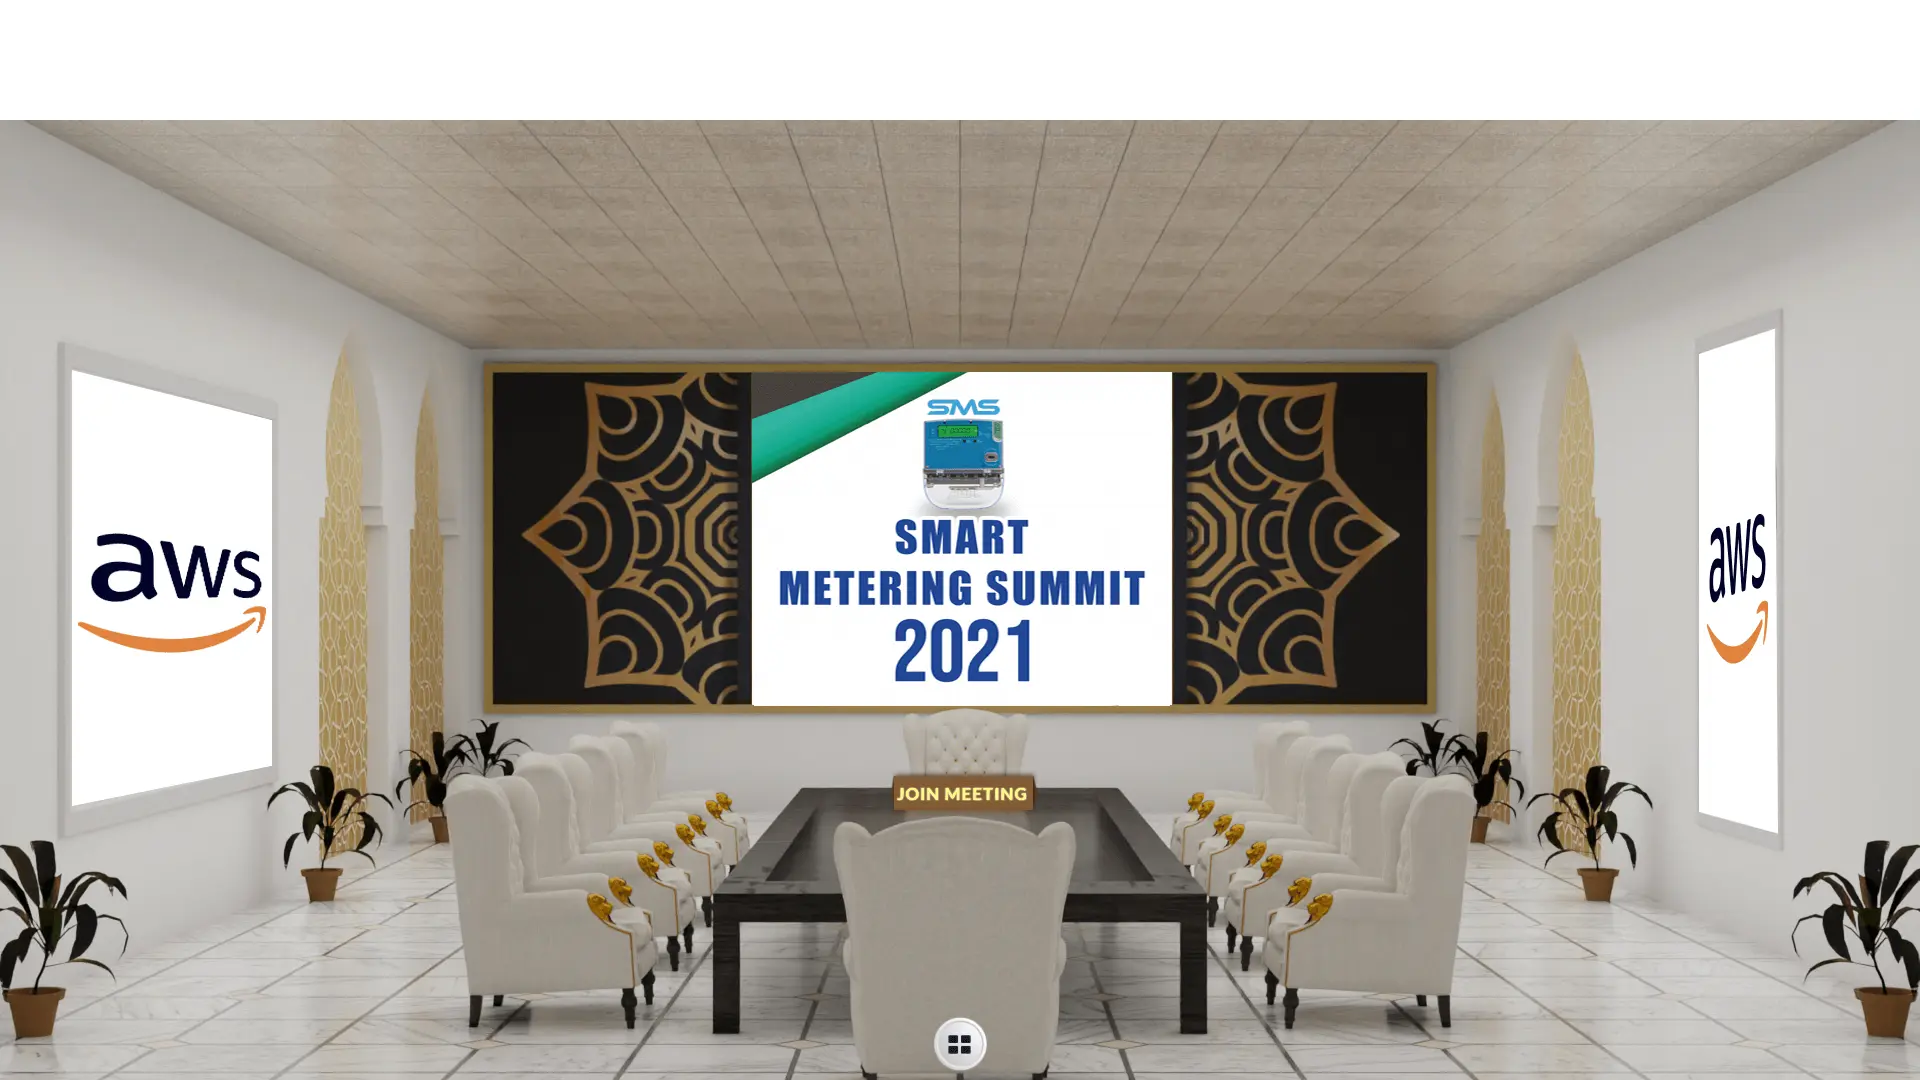 Virtual Conference - Meeting Room